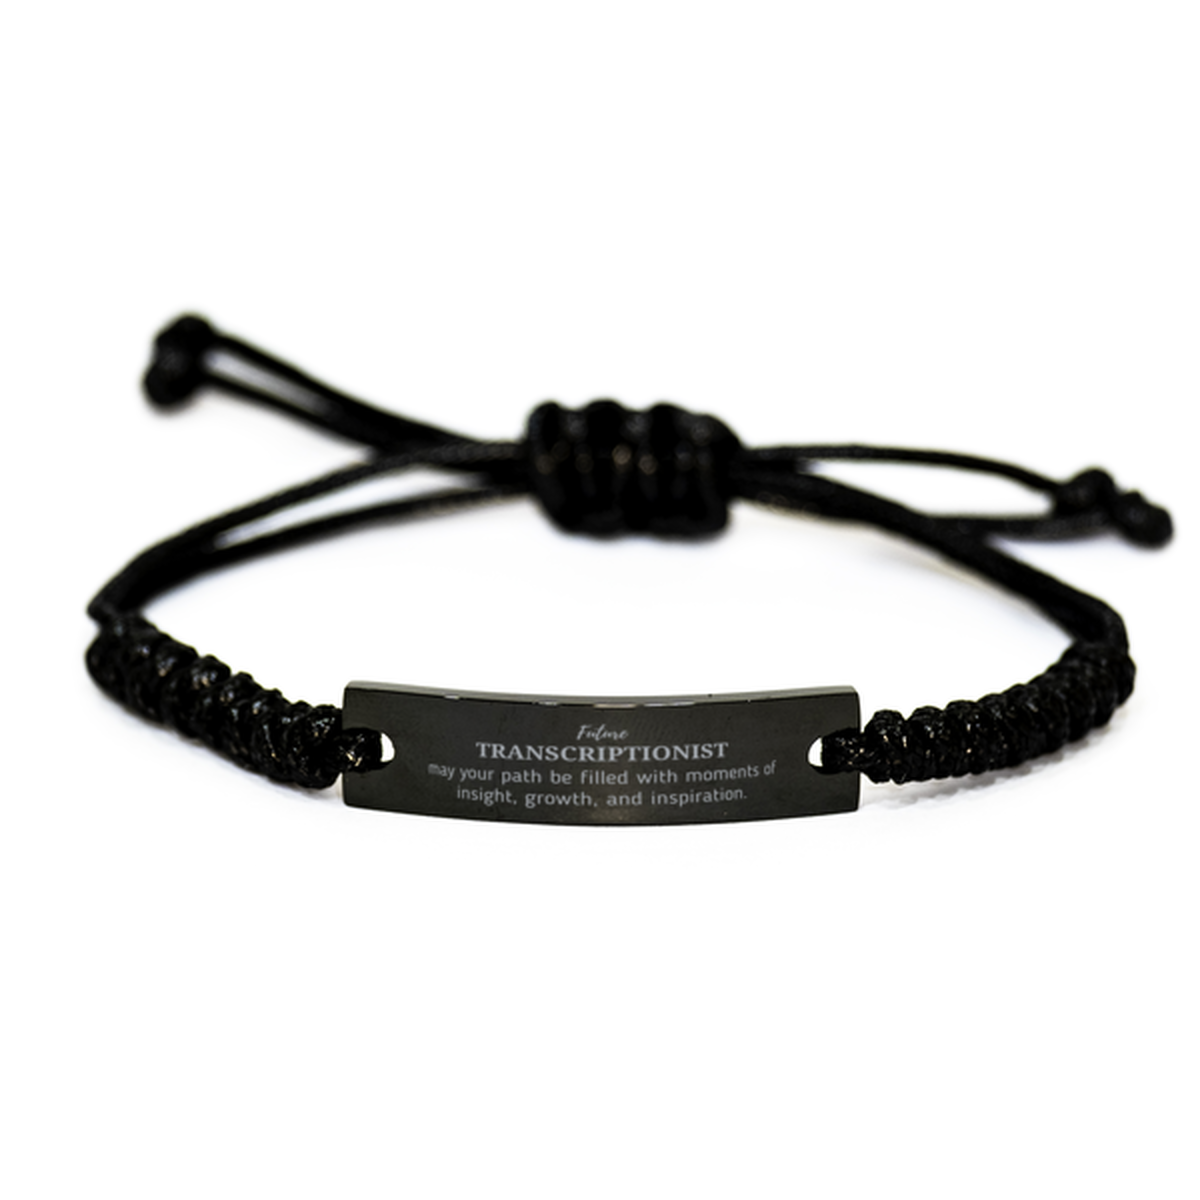 Future Transcriptionist Gifts, May your path be filled with moments of insight, Graduation Gifts for New Transcriptionist, Christmas Unique Black Rope Bracelet For Men, Women, Friends